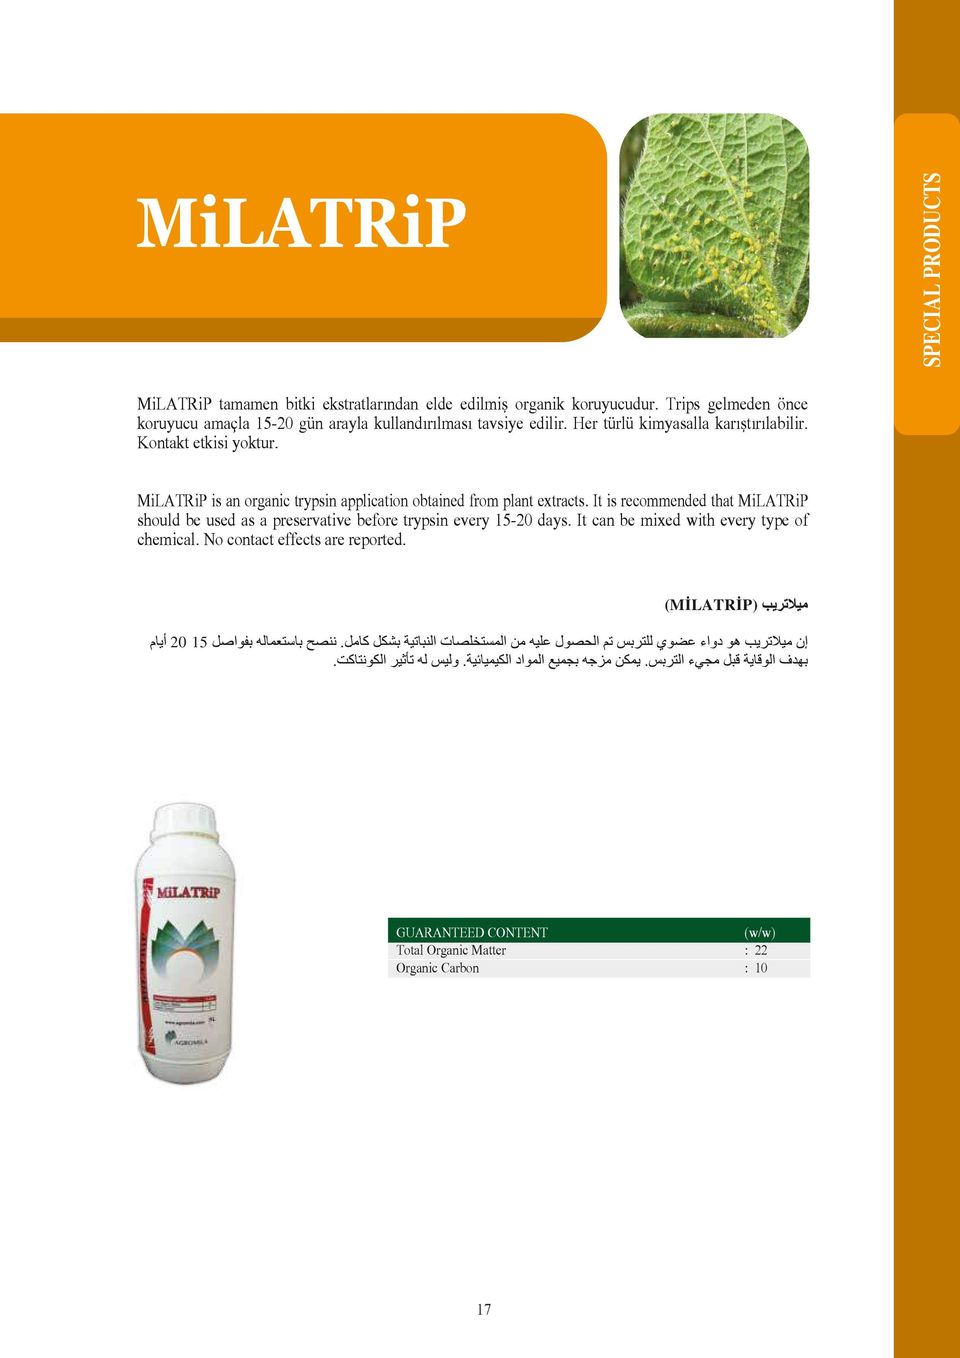 trypsin application obtained from plant extracts It is recommended that MiLATRiP should be used as a preservative before trypsin every